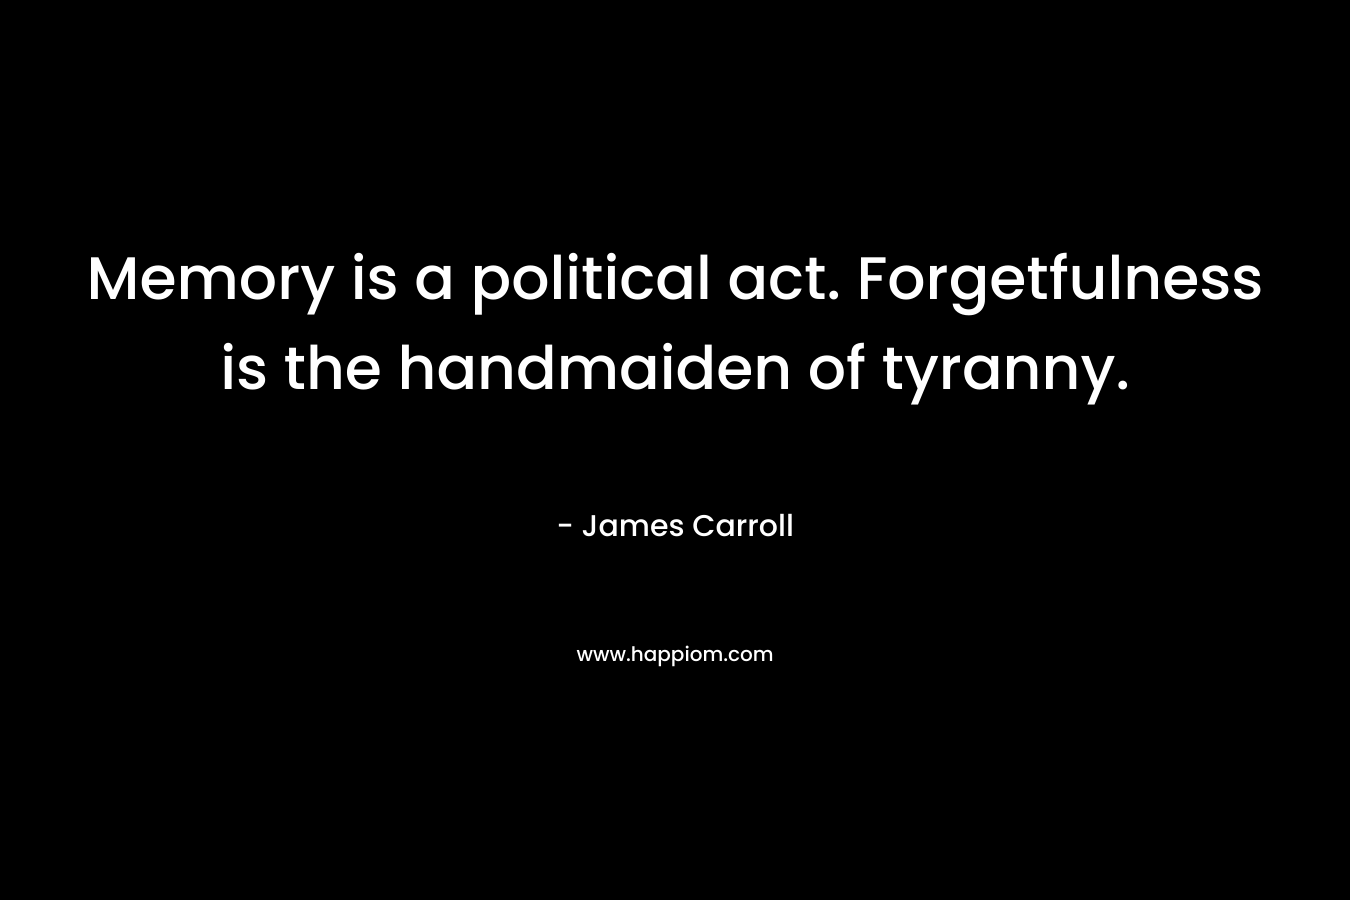 Memory is a political act. Forgetfulness is the handmaiden of tyranny.